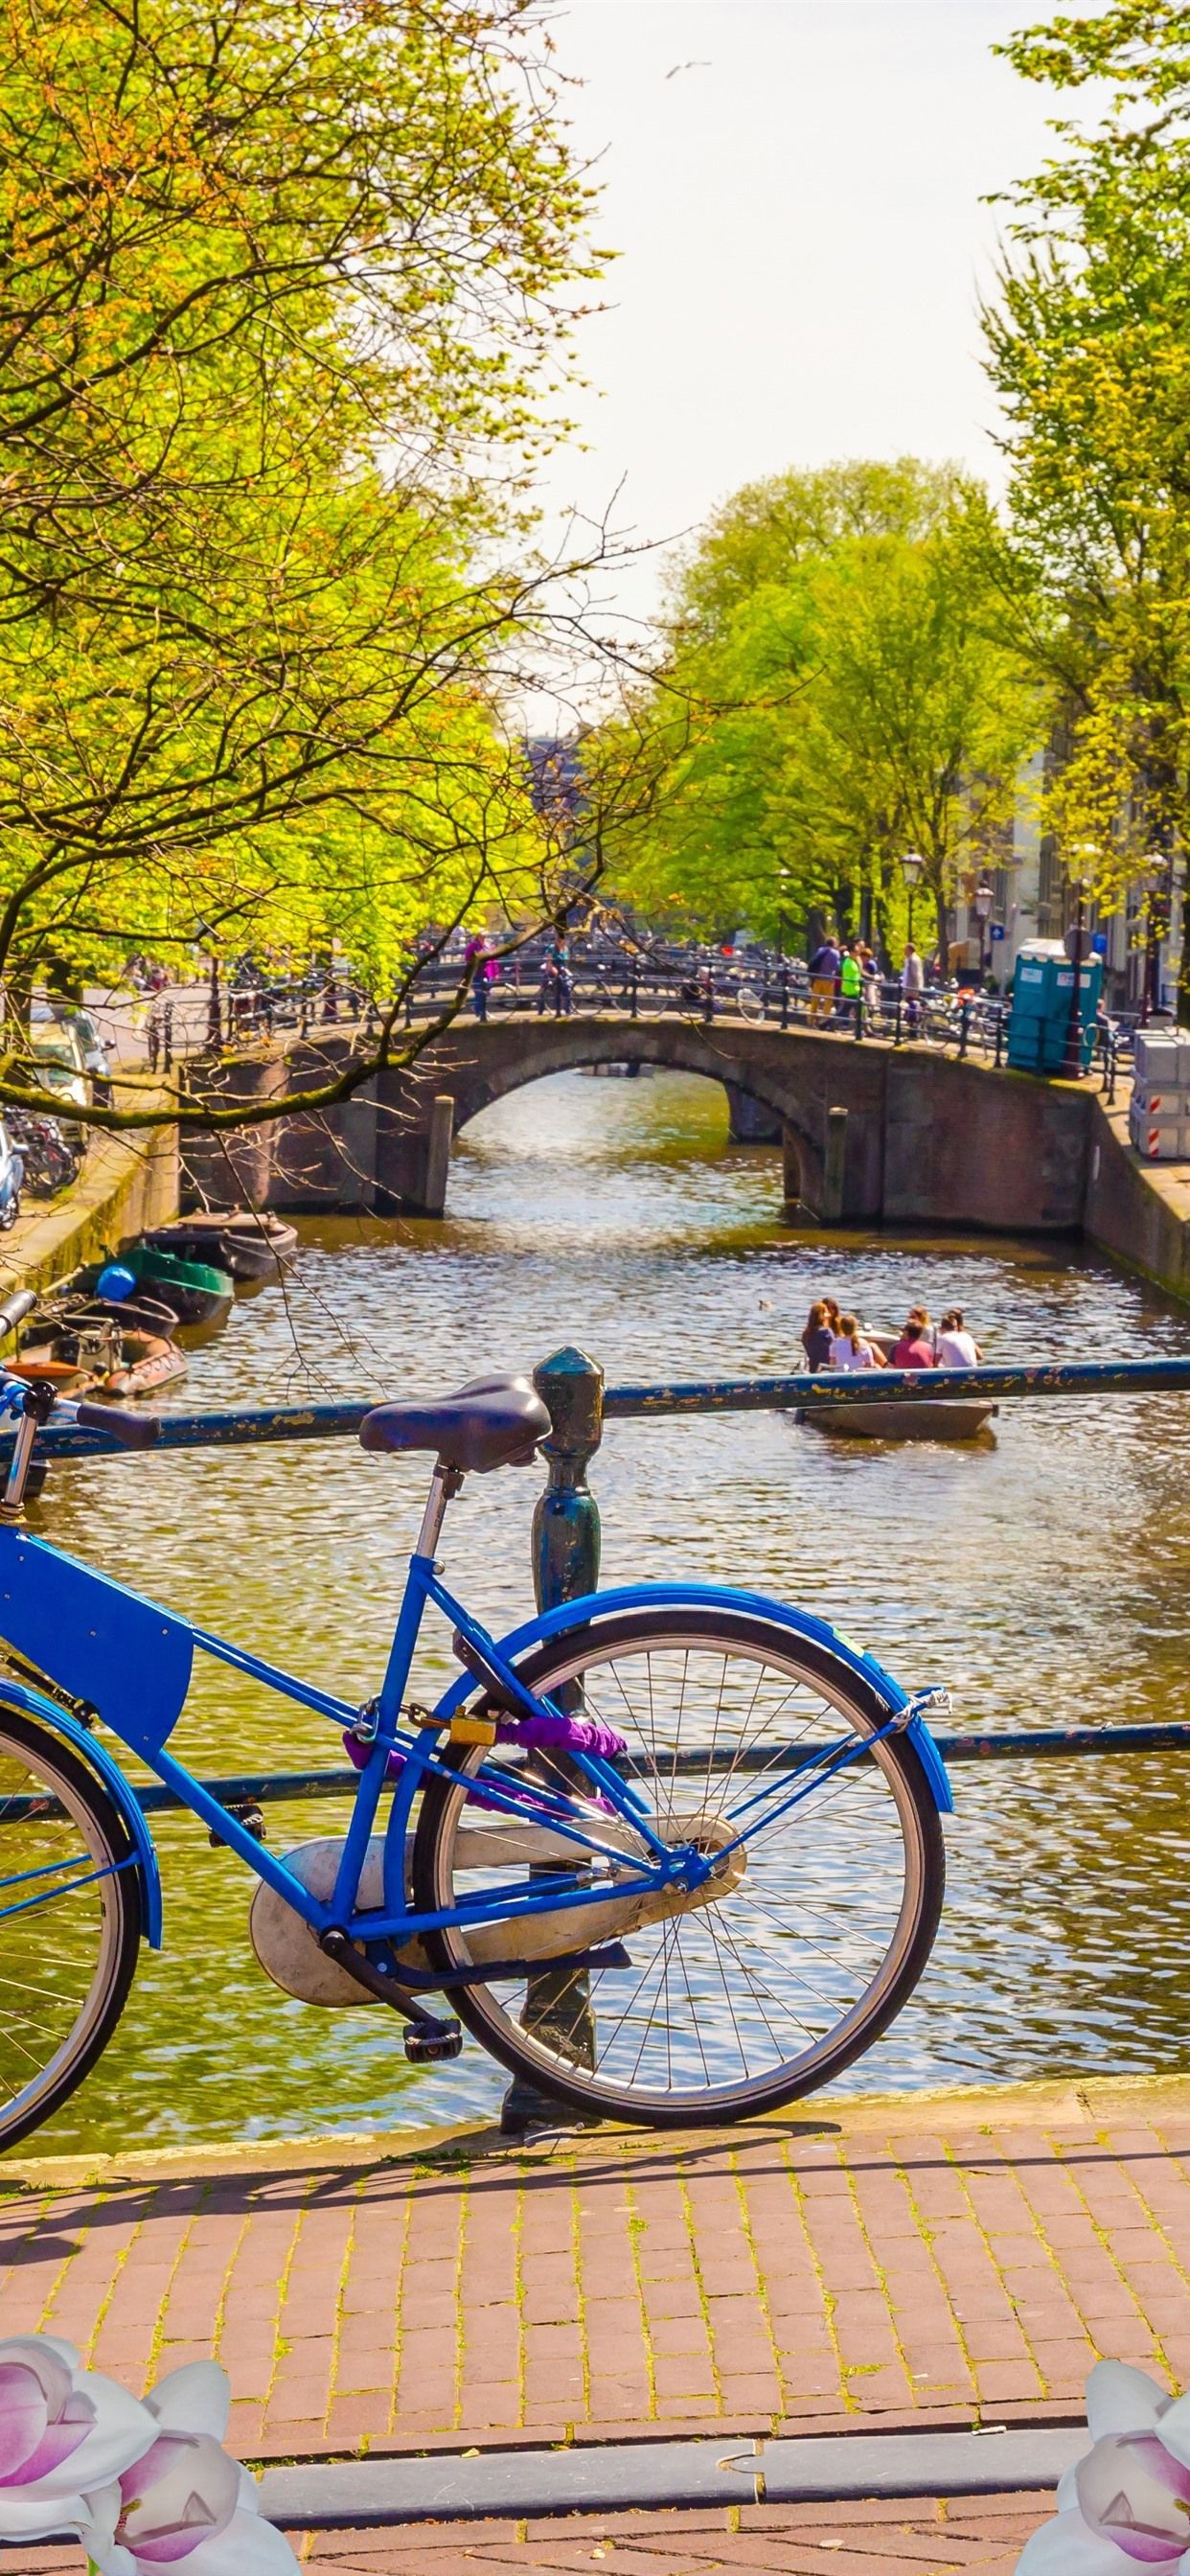 Netherlands, Amsterdam, Flowers, Bridge, Bike, City, River, Spring 1242x2688 IPhone 11 Pro XS Max Wallpaper, Background, Picture, Image